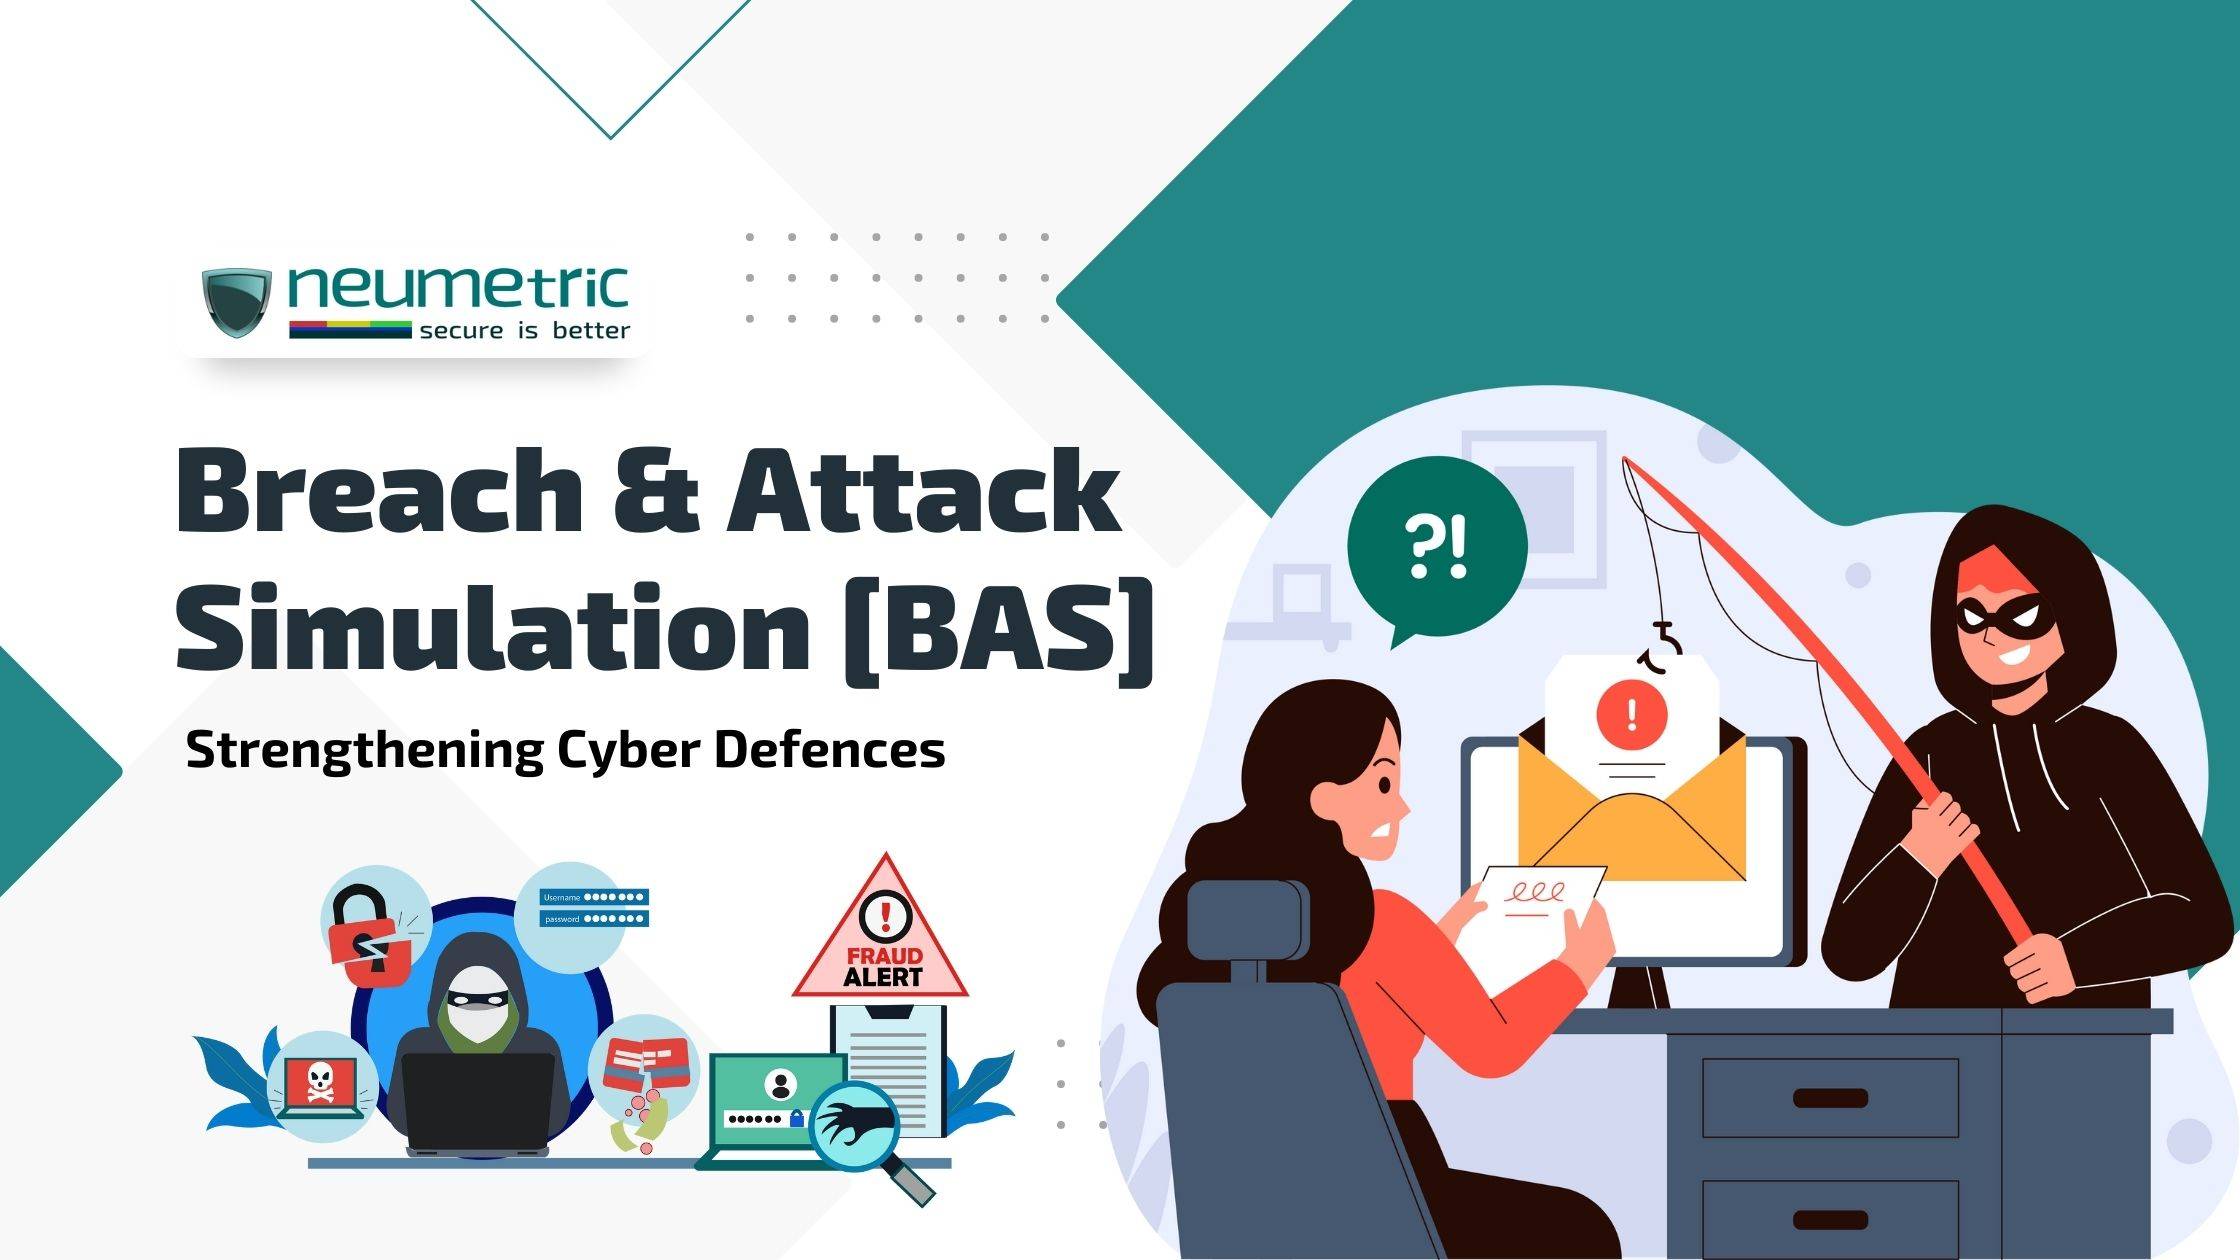 Breach & Attack Simulation [BAS]: Strengthening Cyber Defences